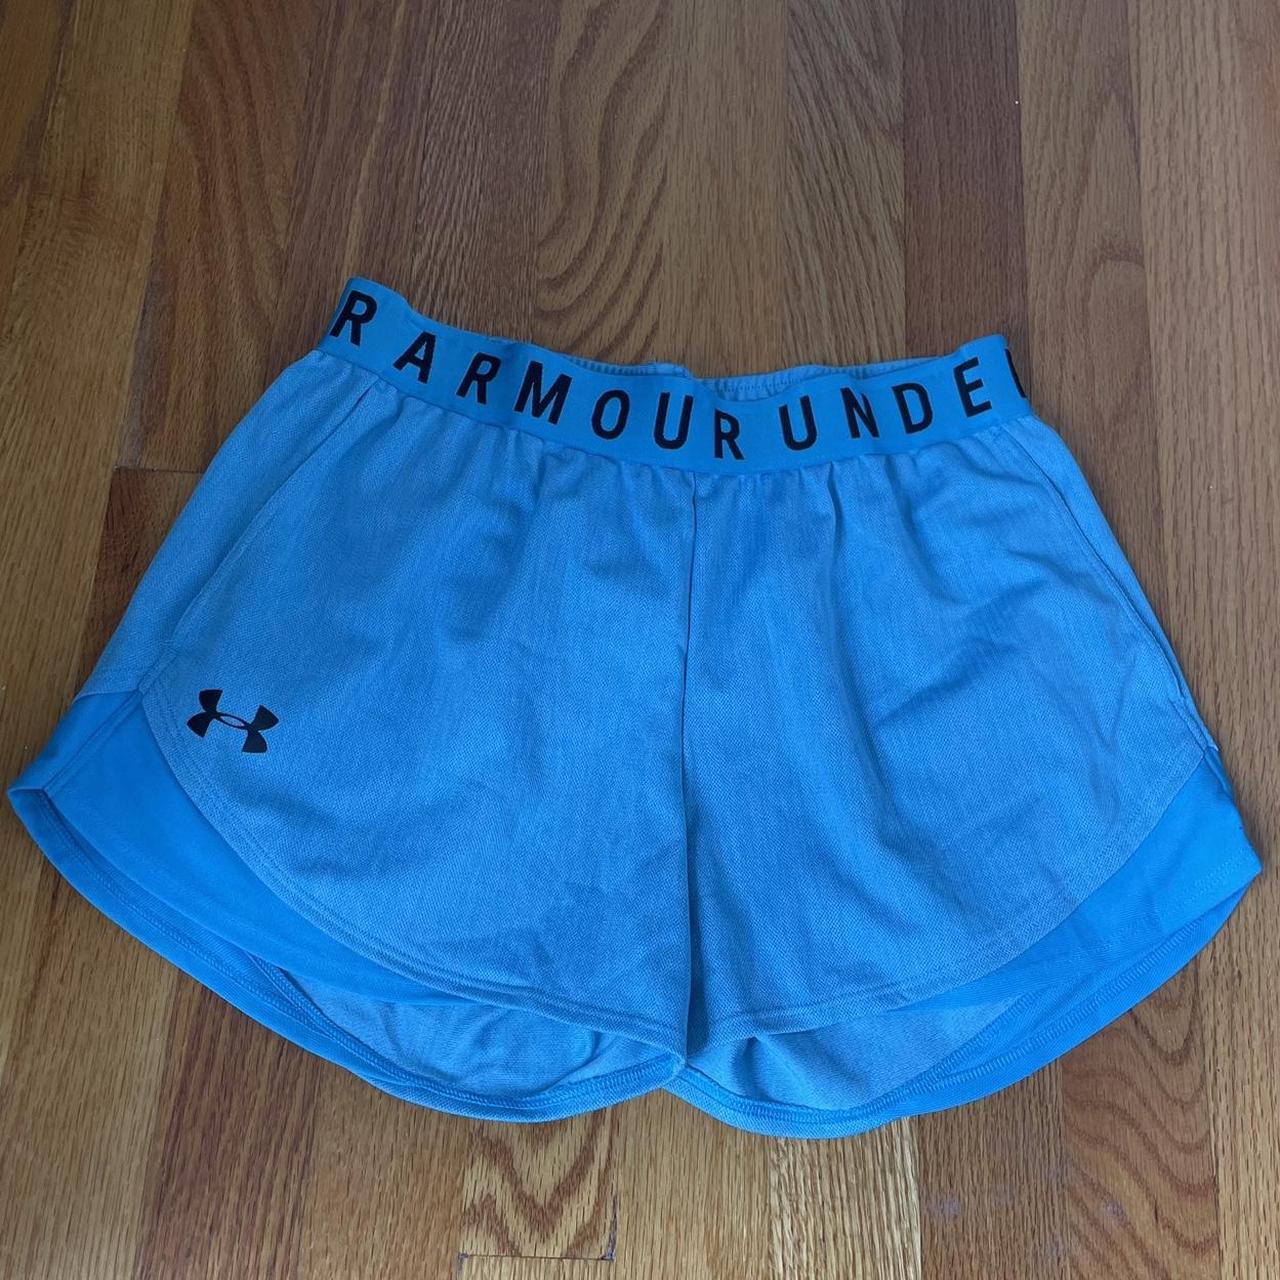 Size XS Under Armor Shorts , Comes with all four